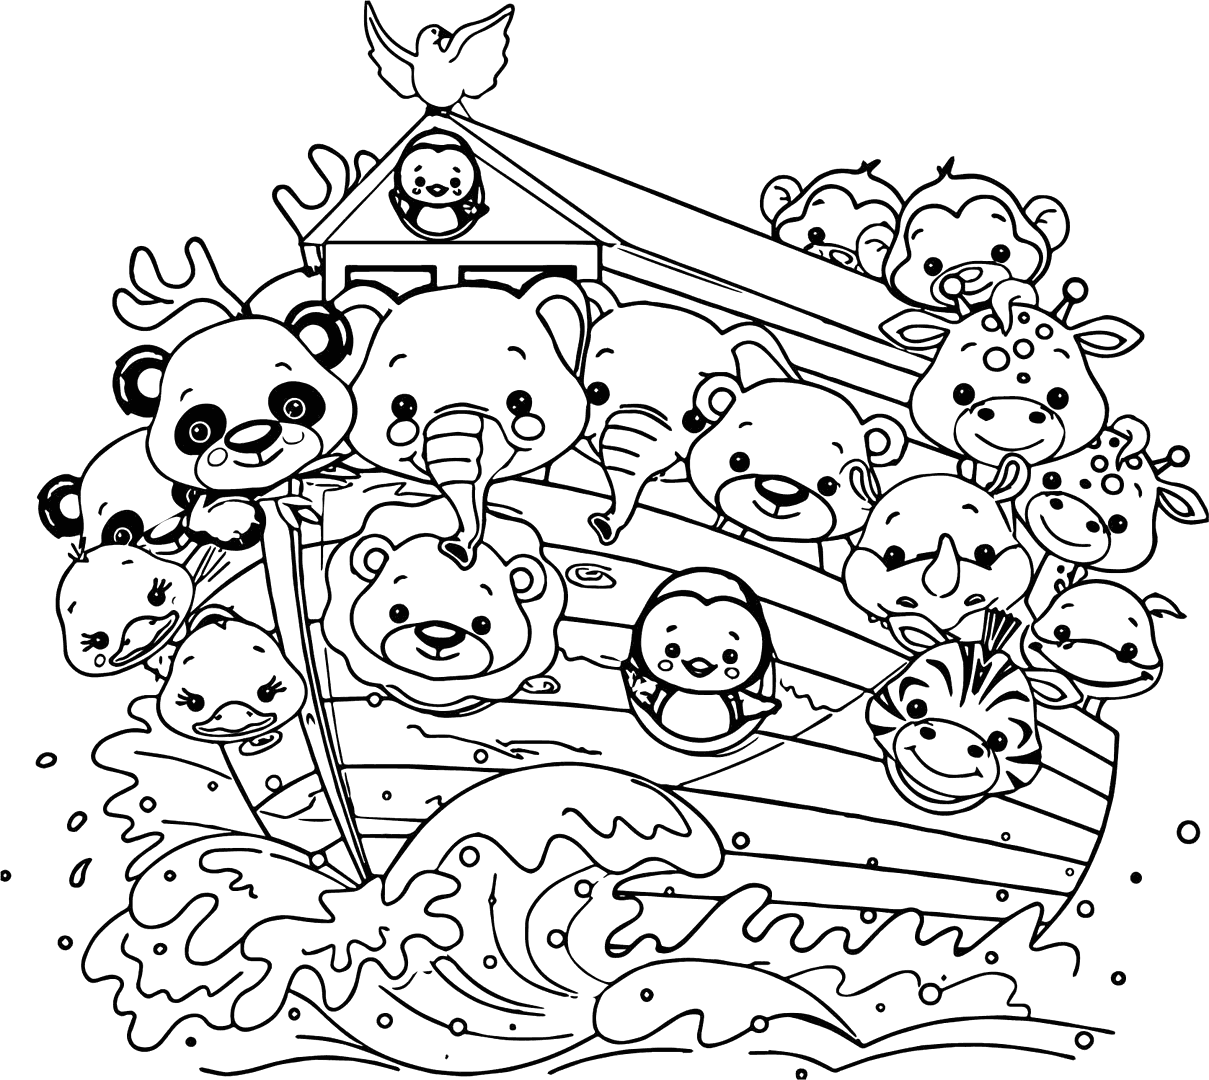 Cute Animals On Noahs Ark Coloring Page